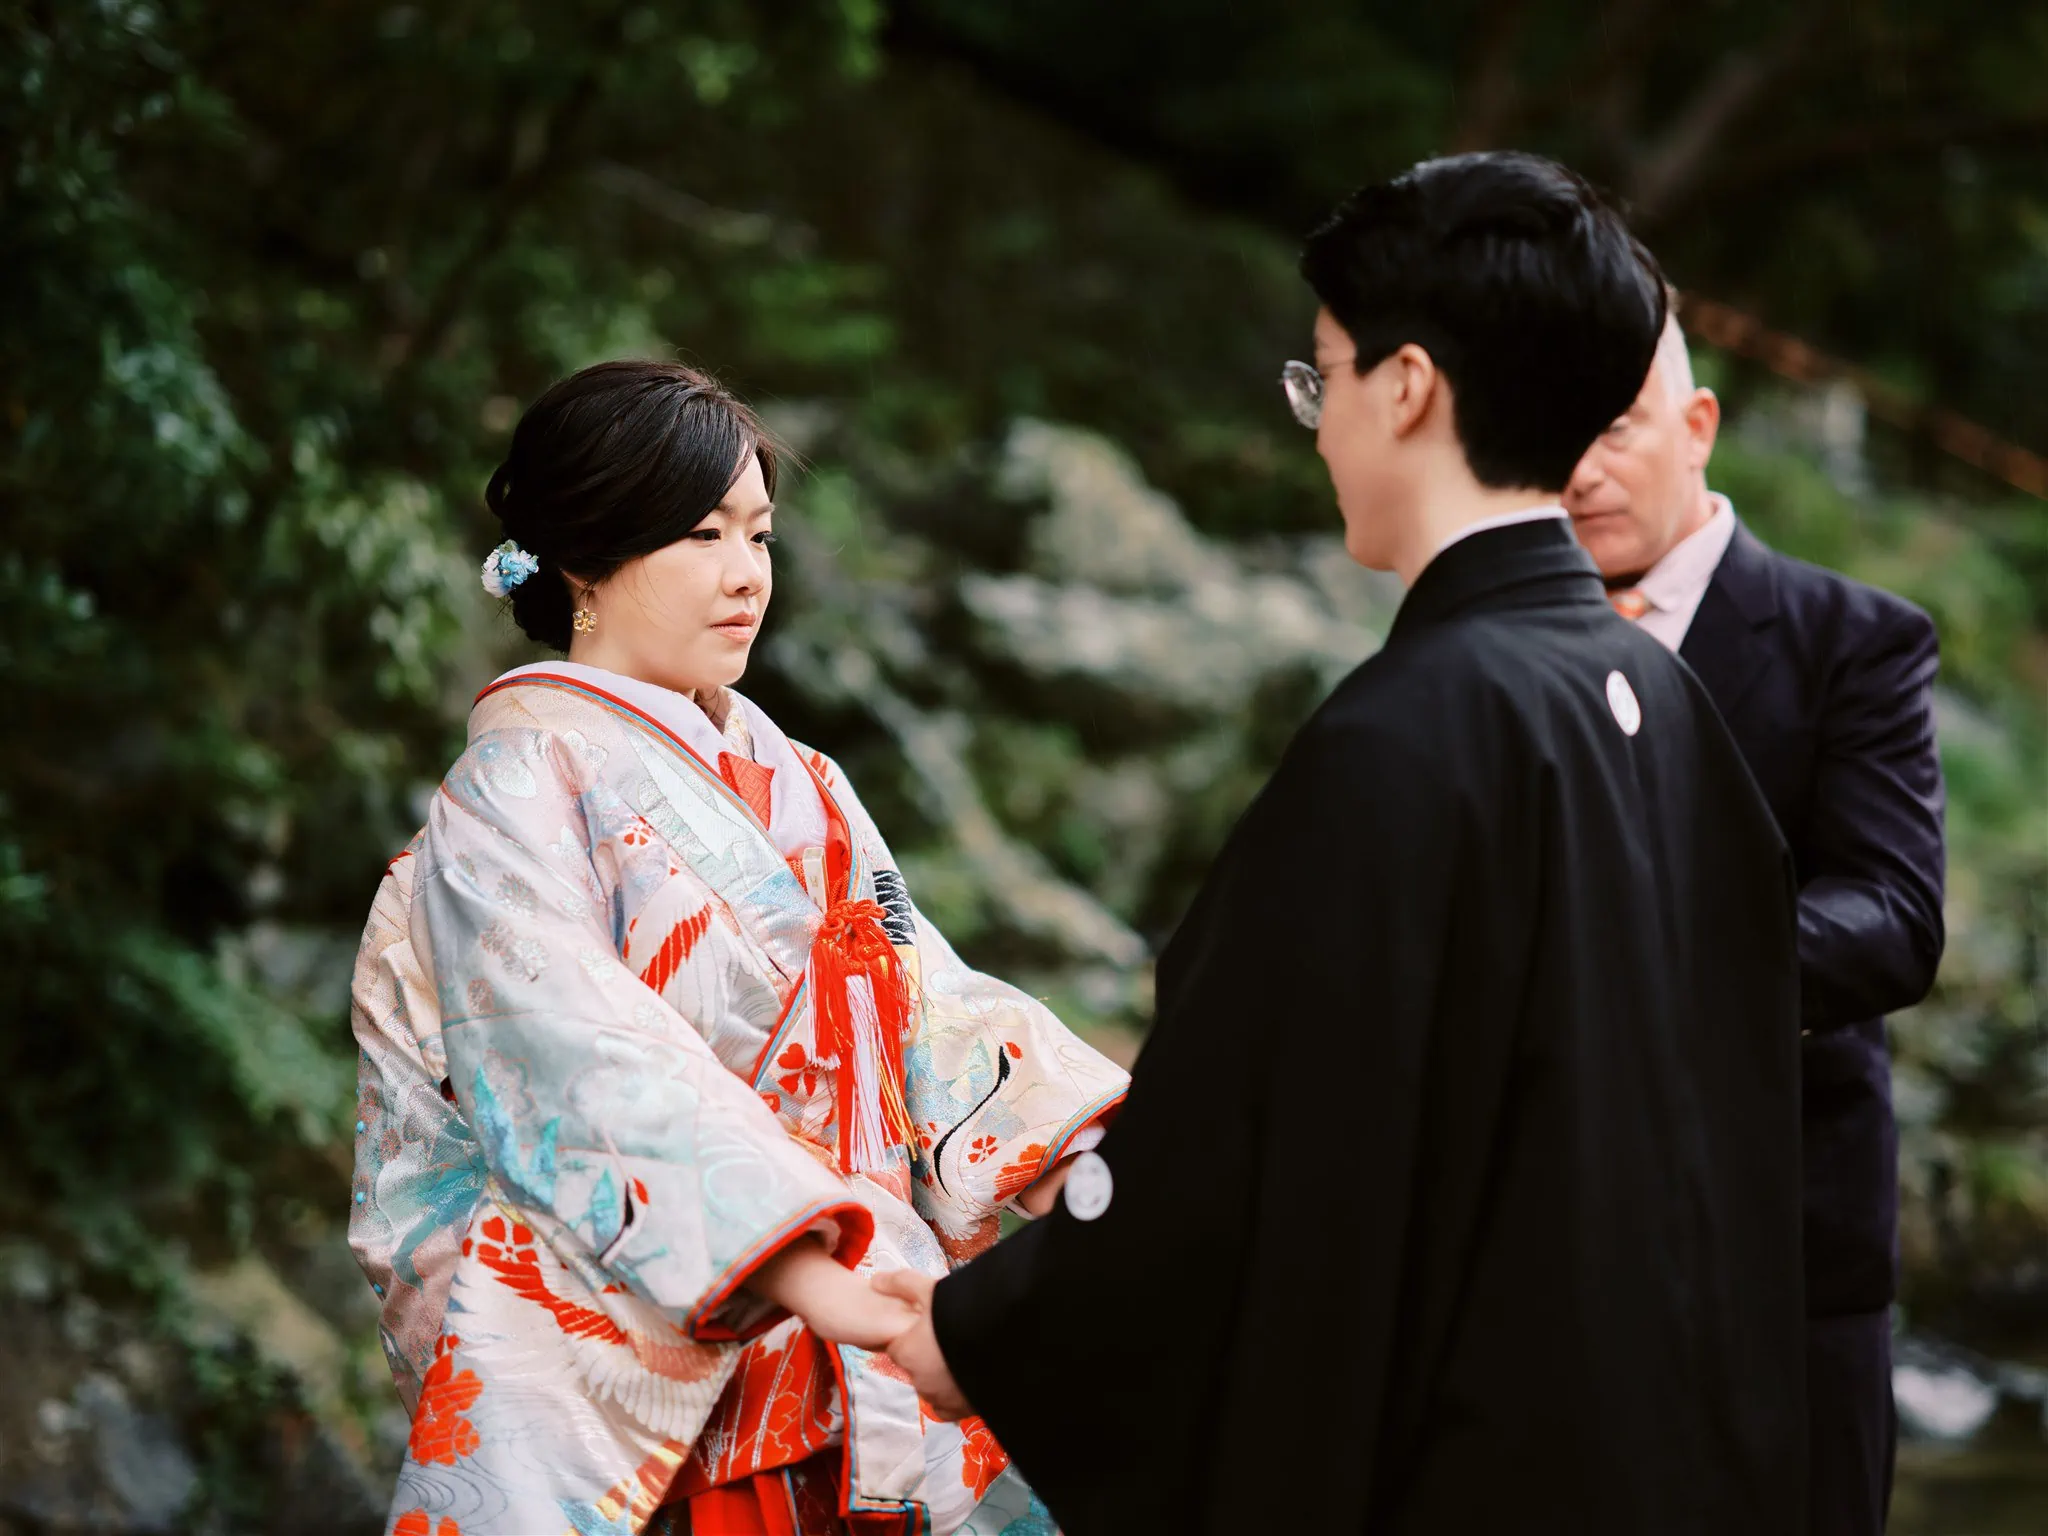 Kyoto Tokyo Japan Elopement Wedding Photographer, Planner & Videographer | A man and woman in kimono standing next to a river captured by an elopement photographer.